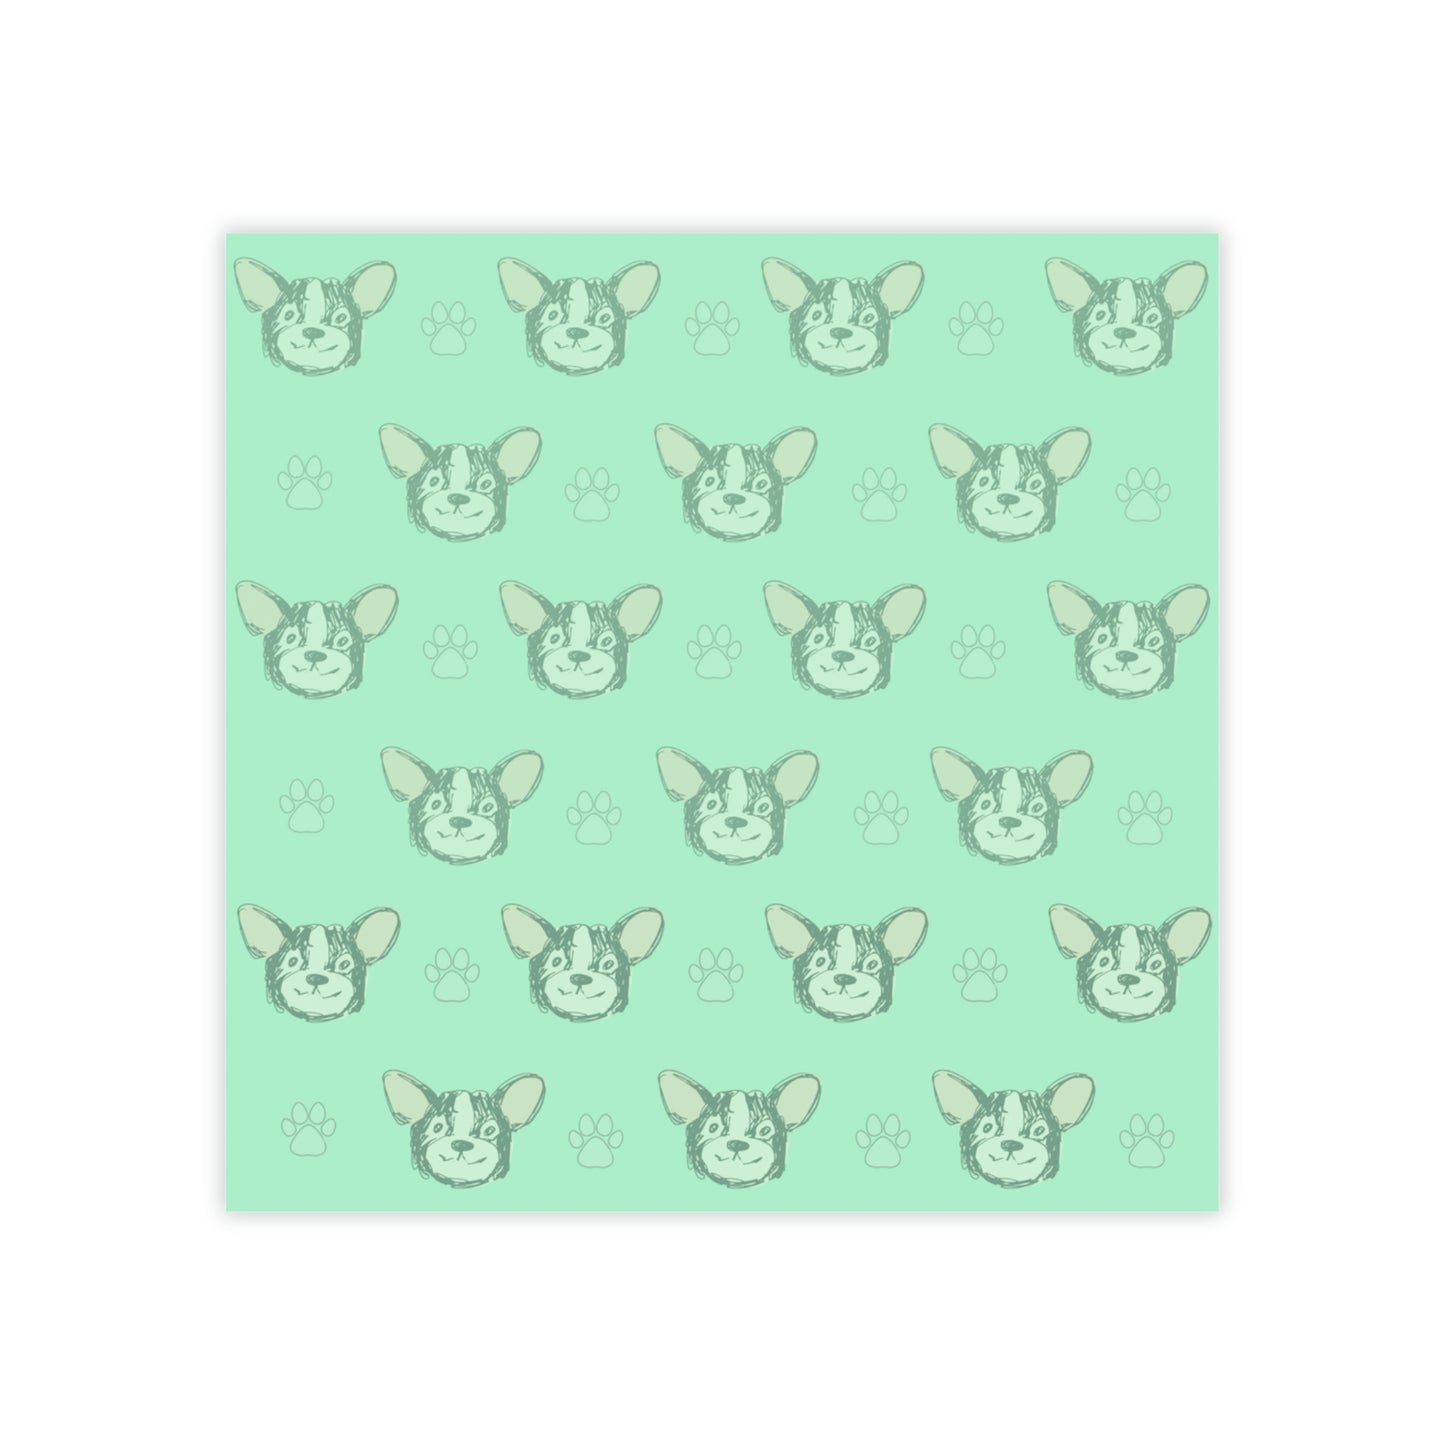 Cute Dog Faces and Paws design Post-it® Note Pads